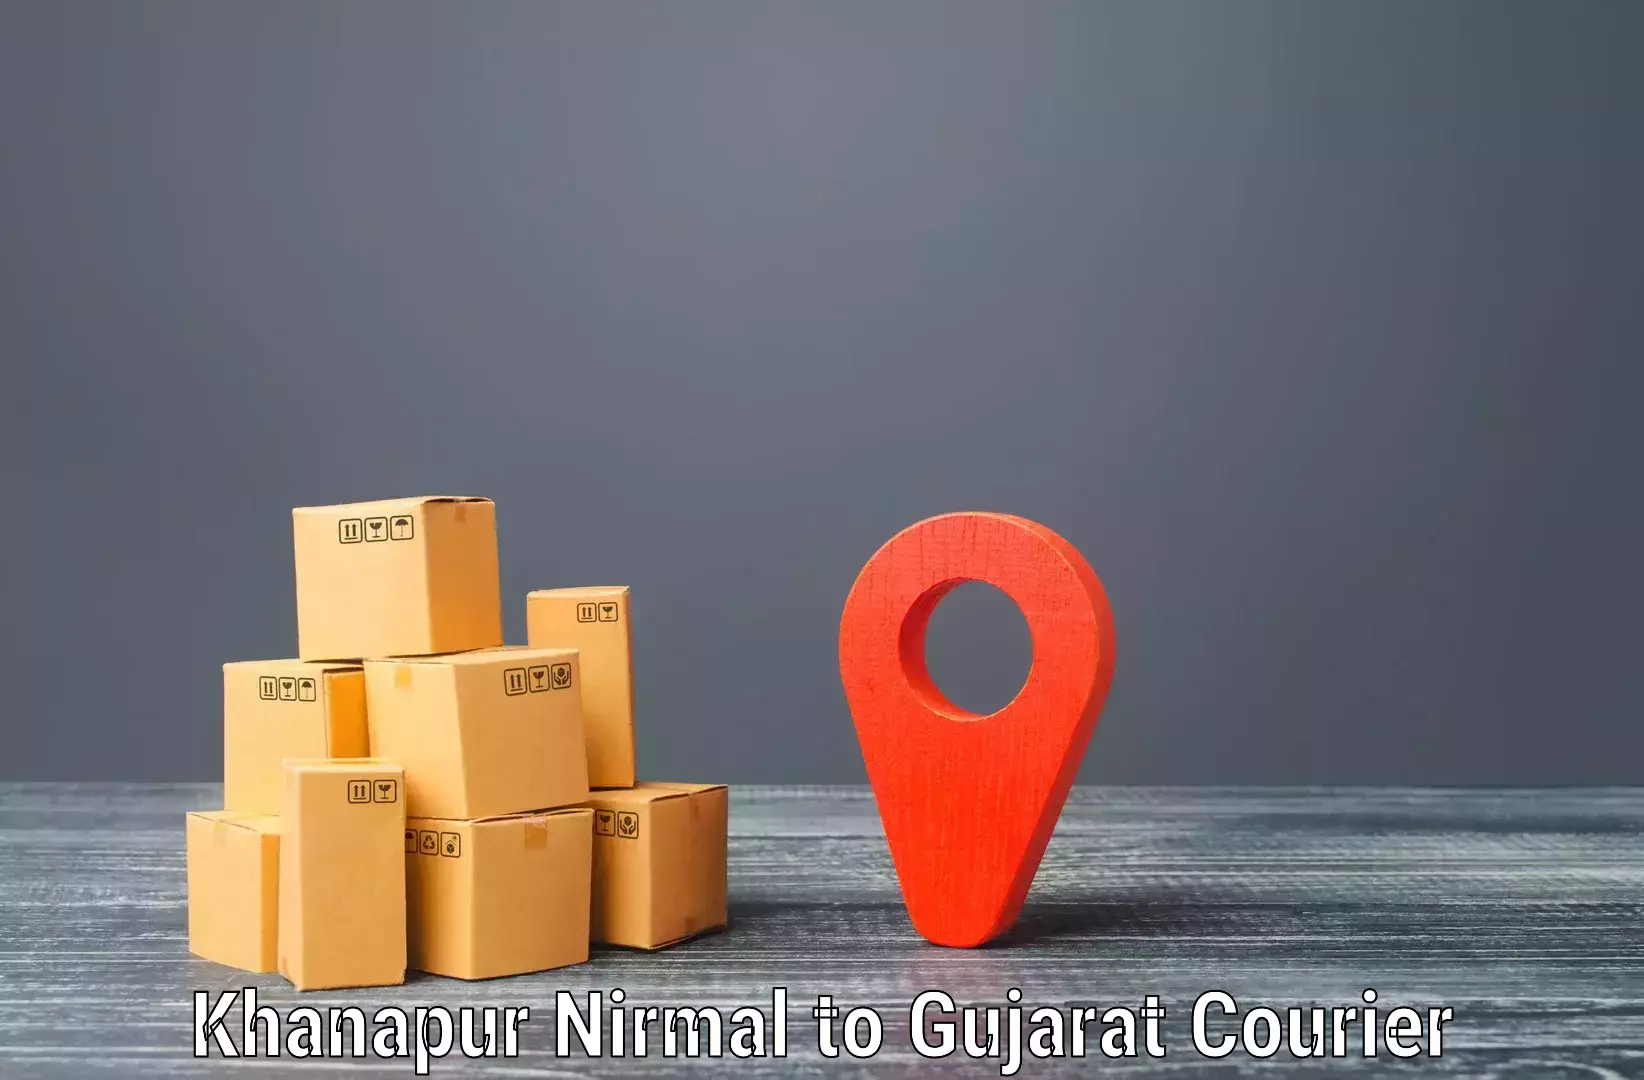 Express package services Khanapur Nirmal to Halvad